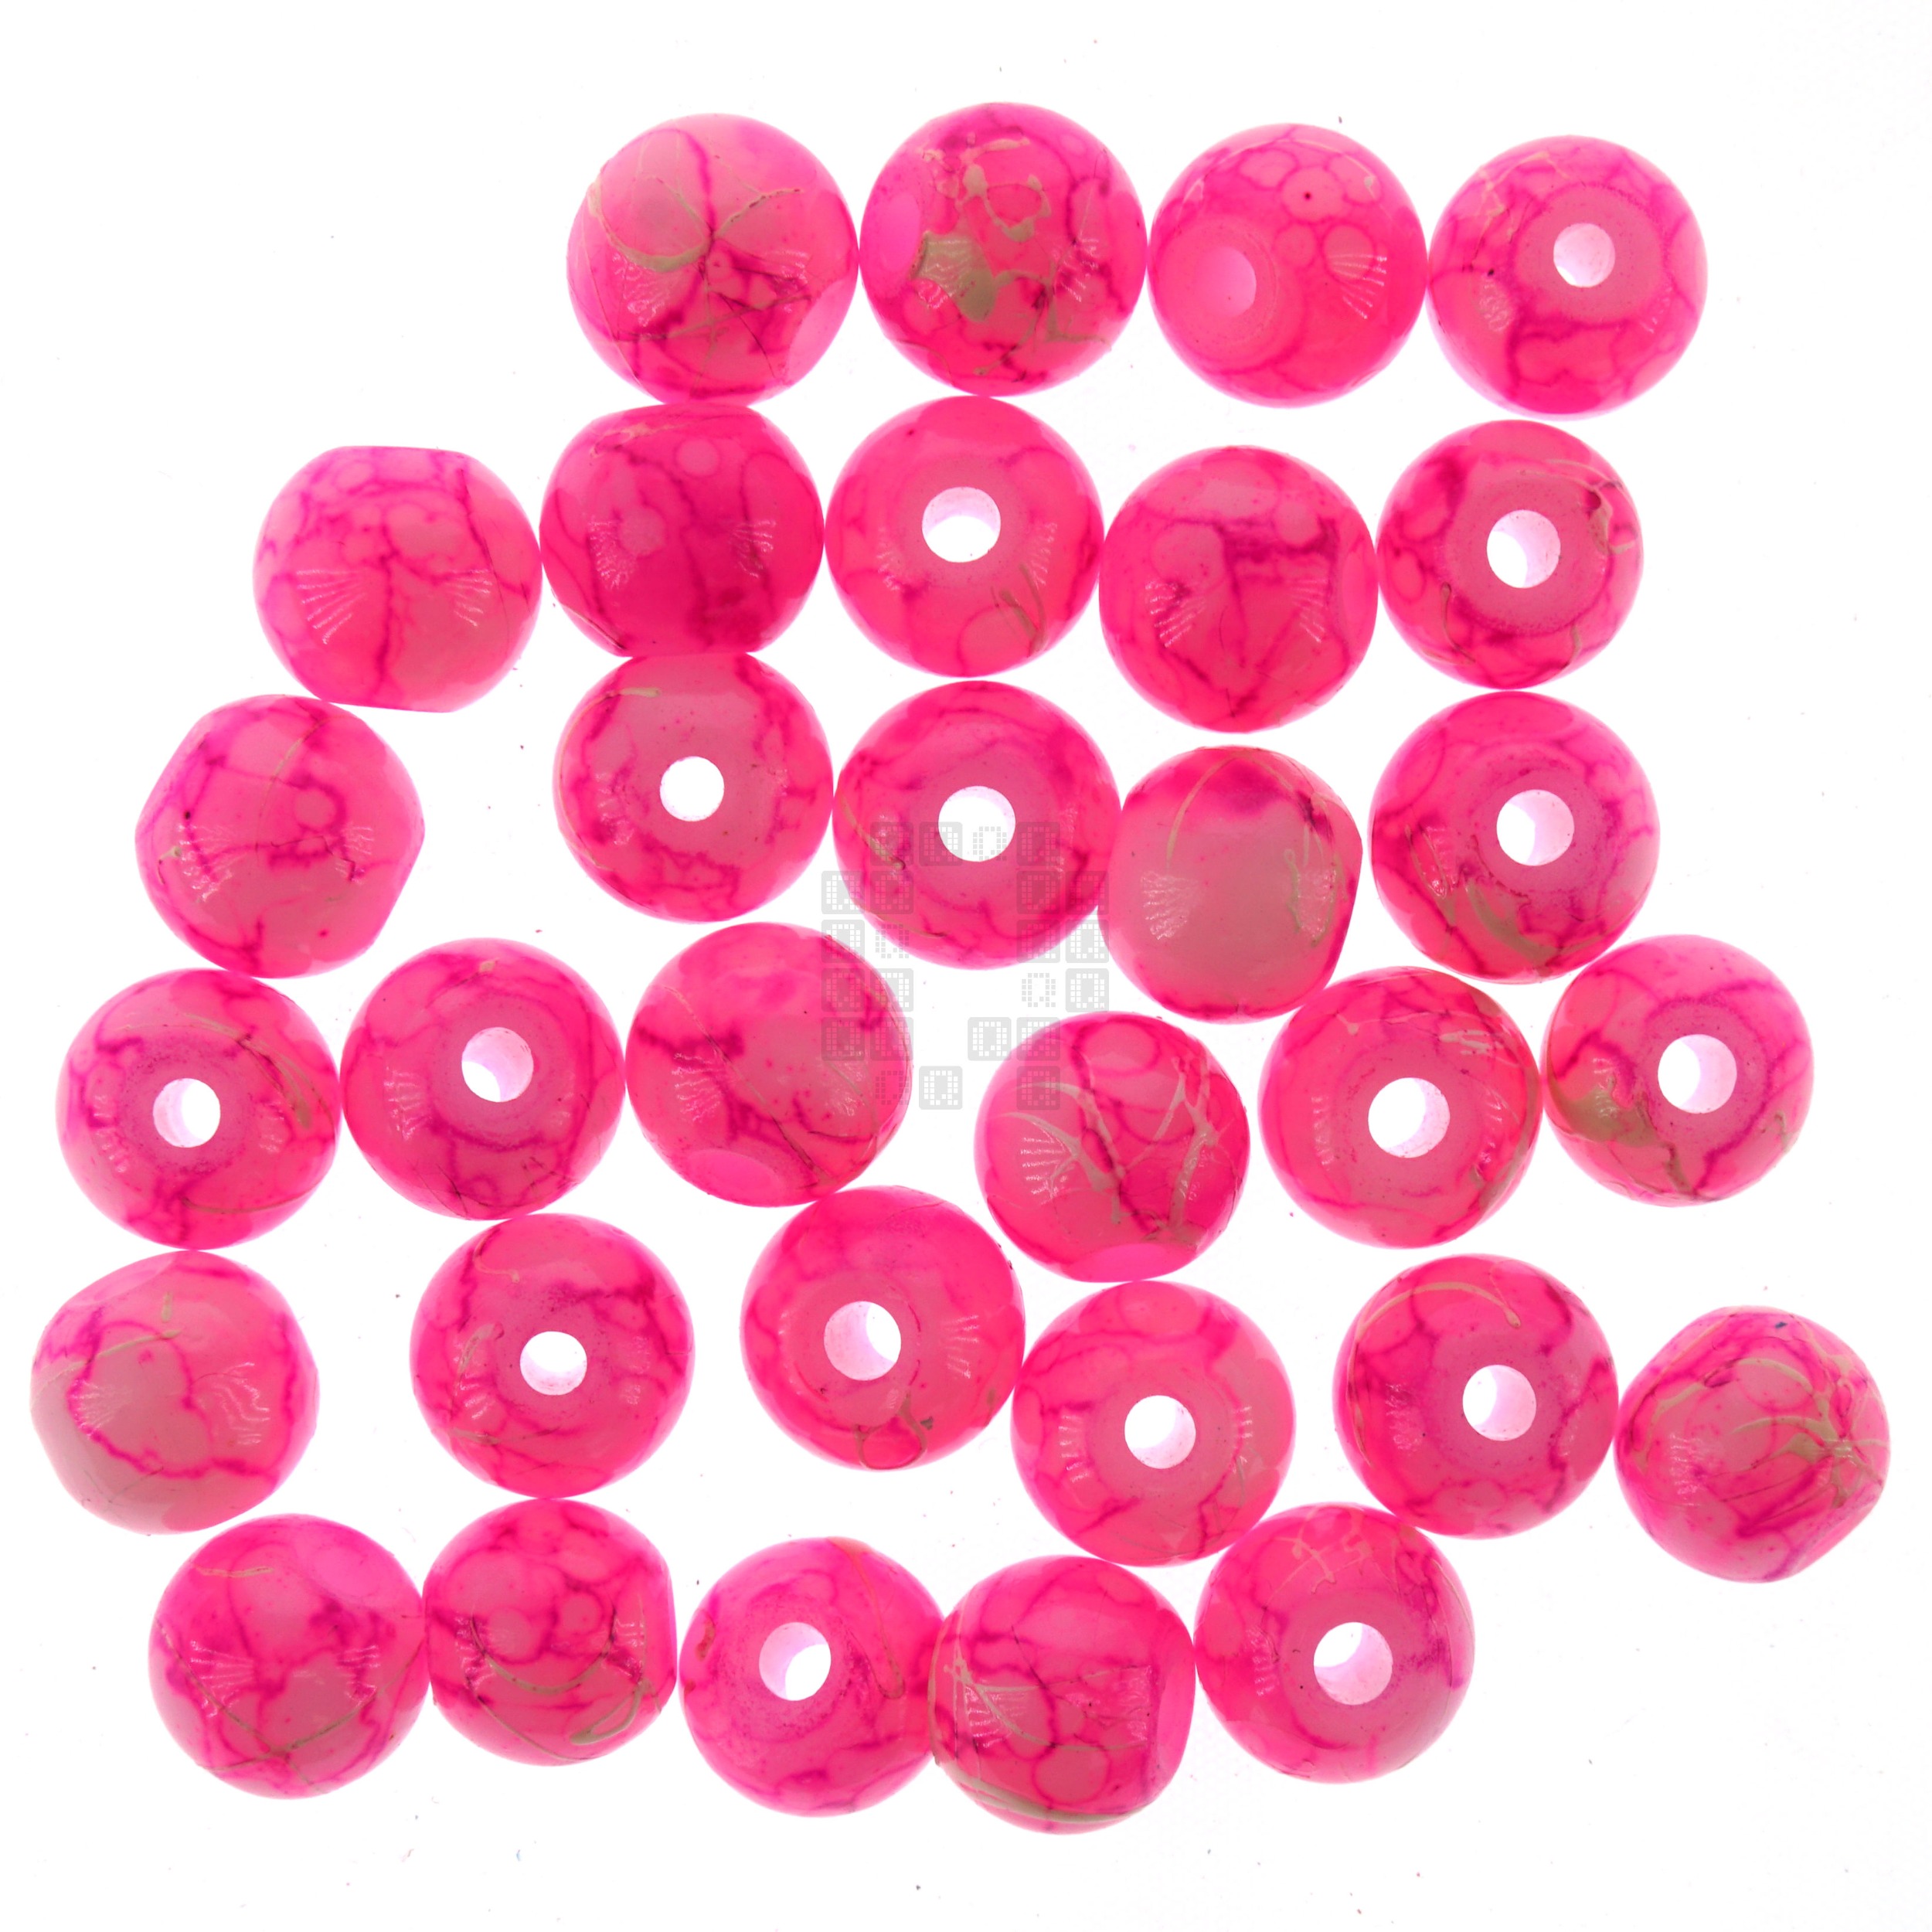 Earth and Sky 8mm Loose Glass Beads, 30 Pieces